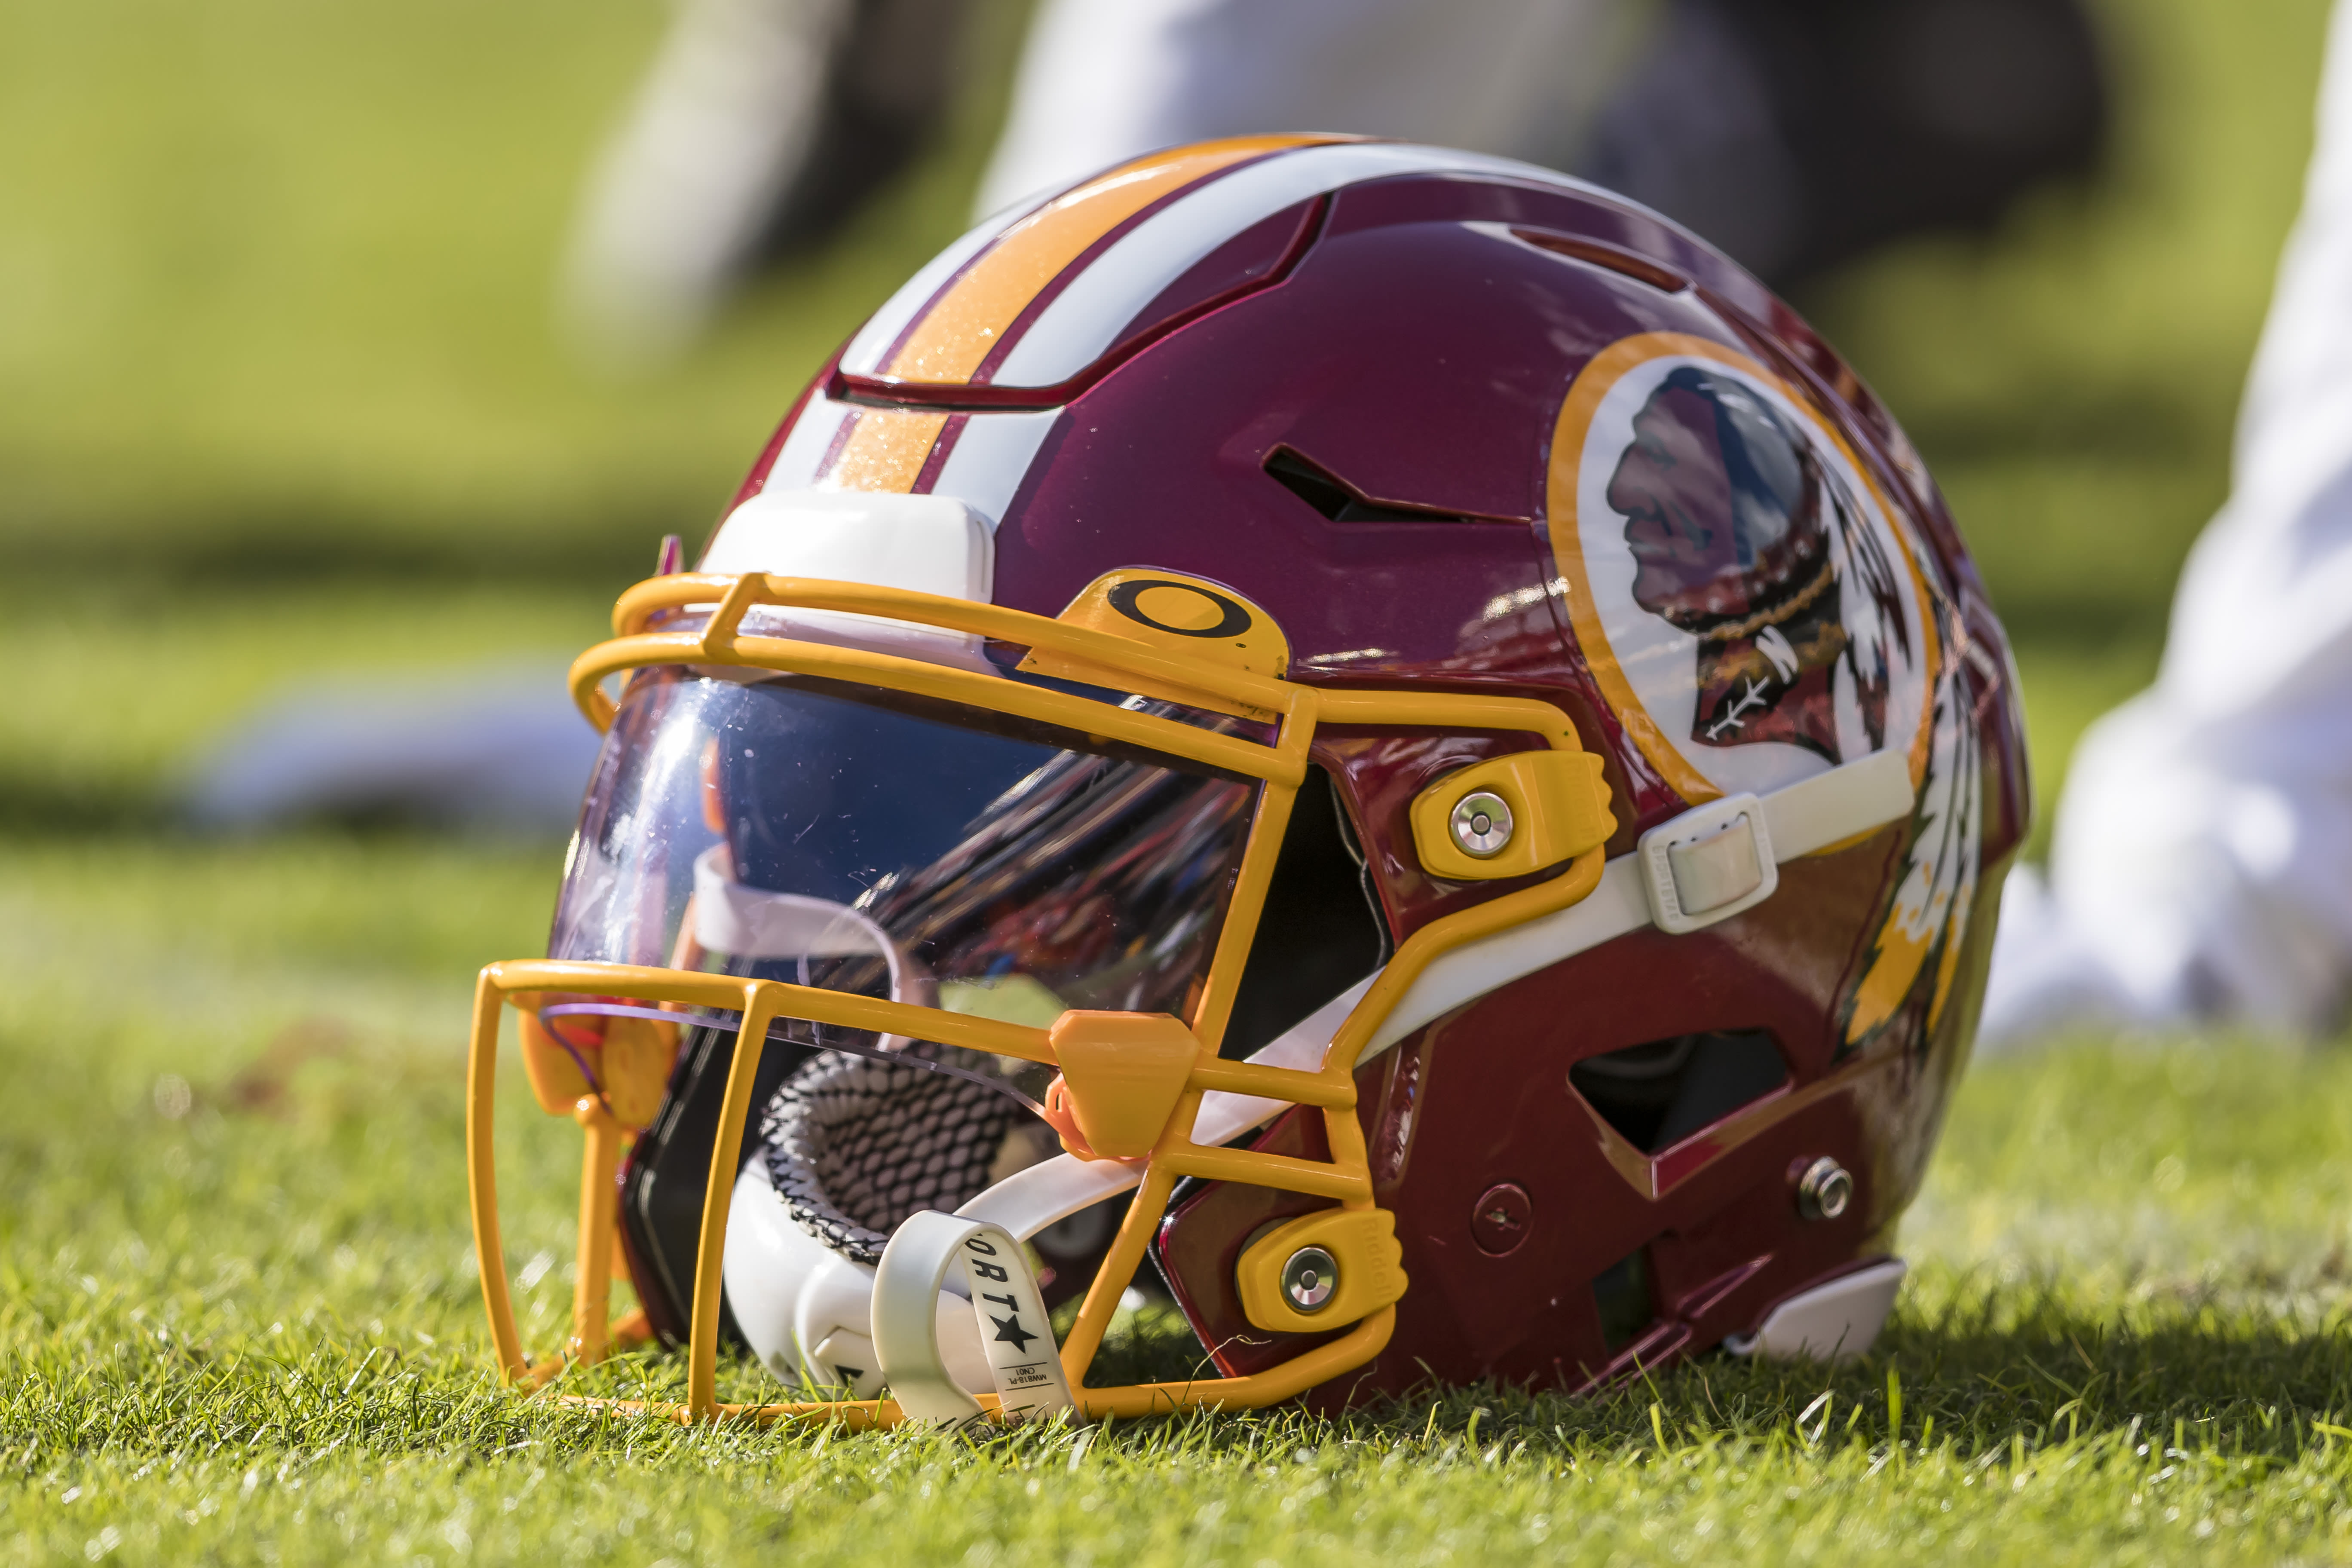 Washington Redskins to review name after FedEx asks team to change it